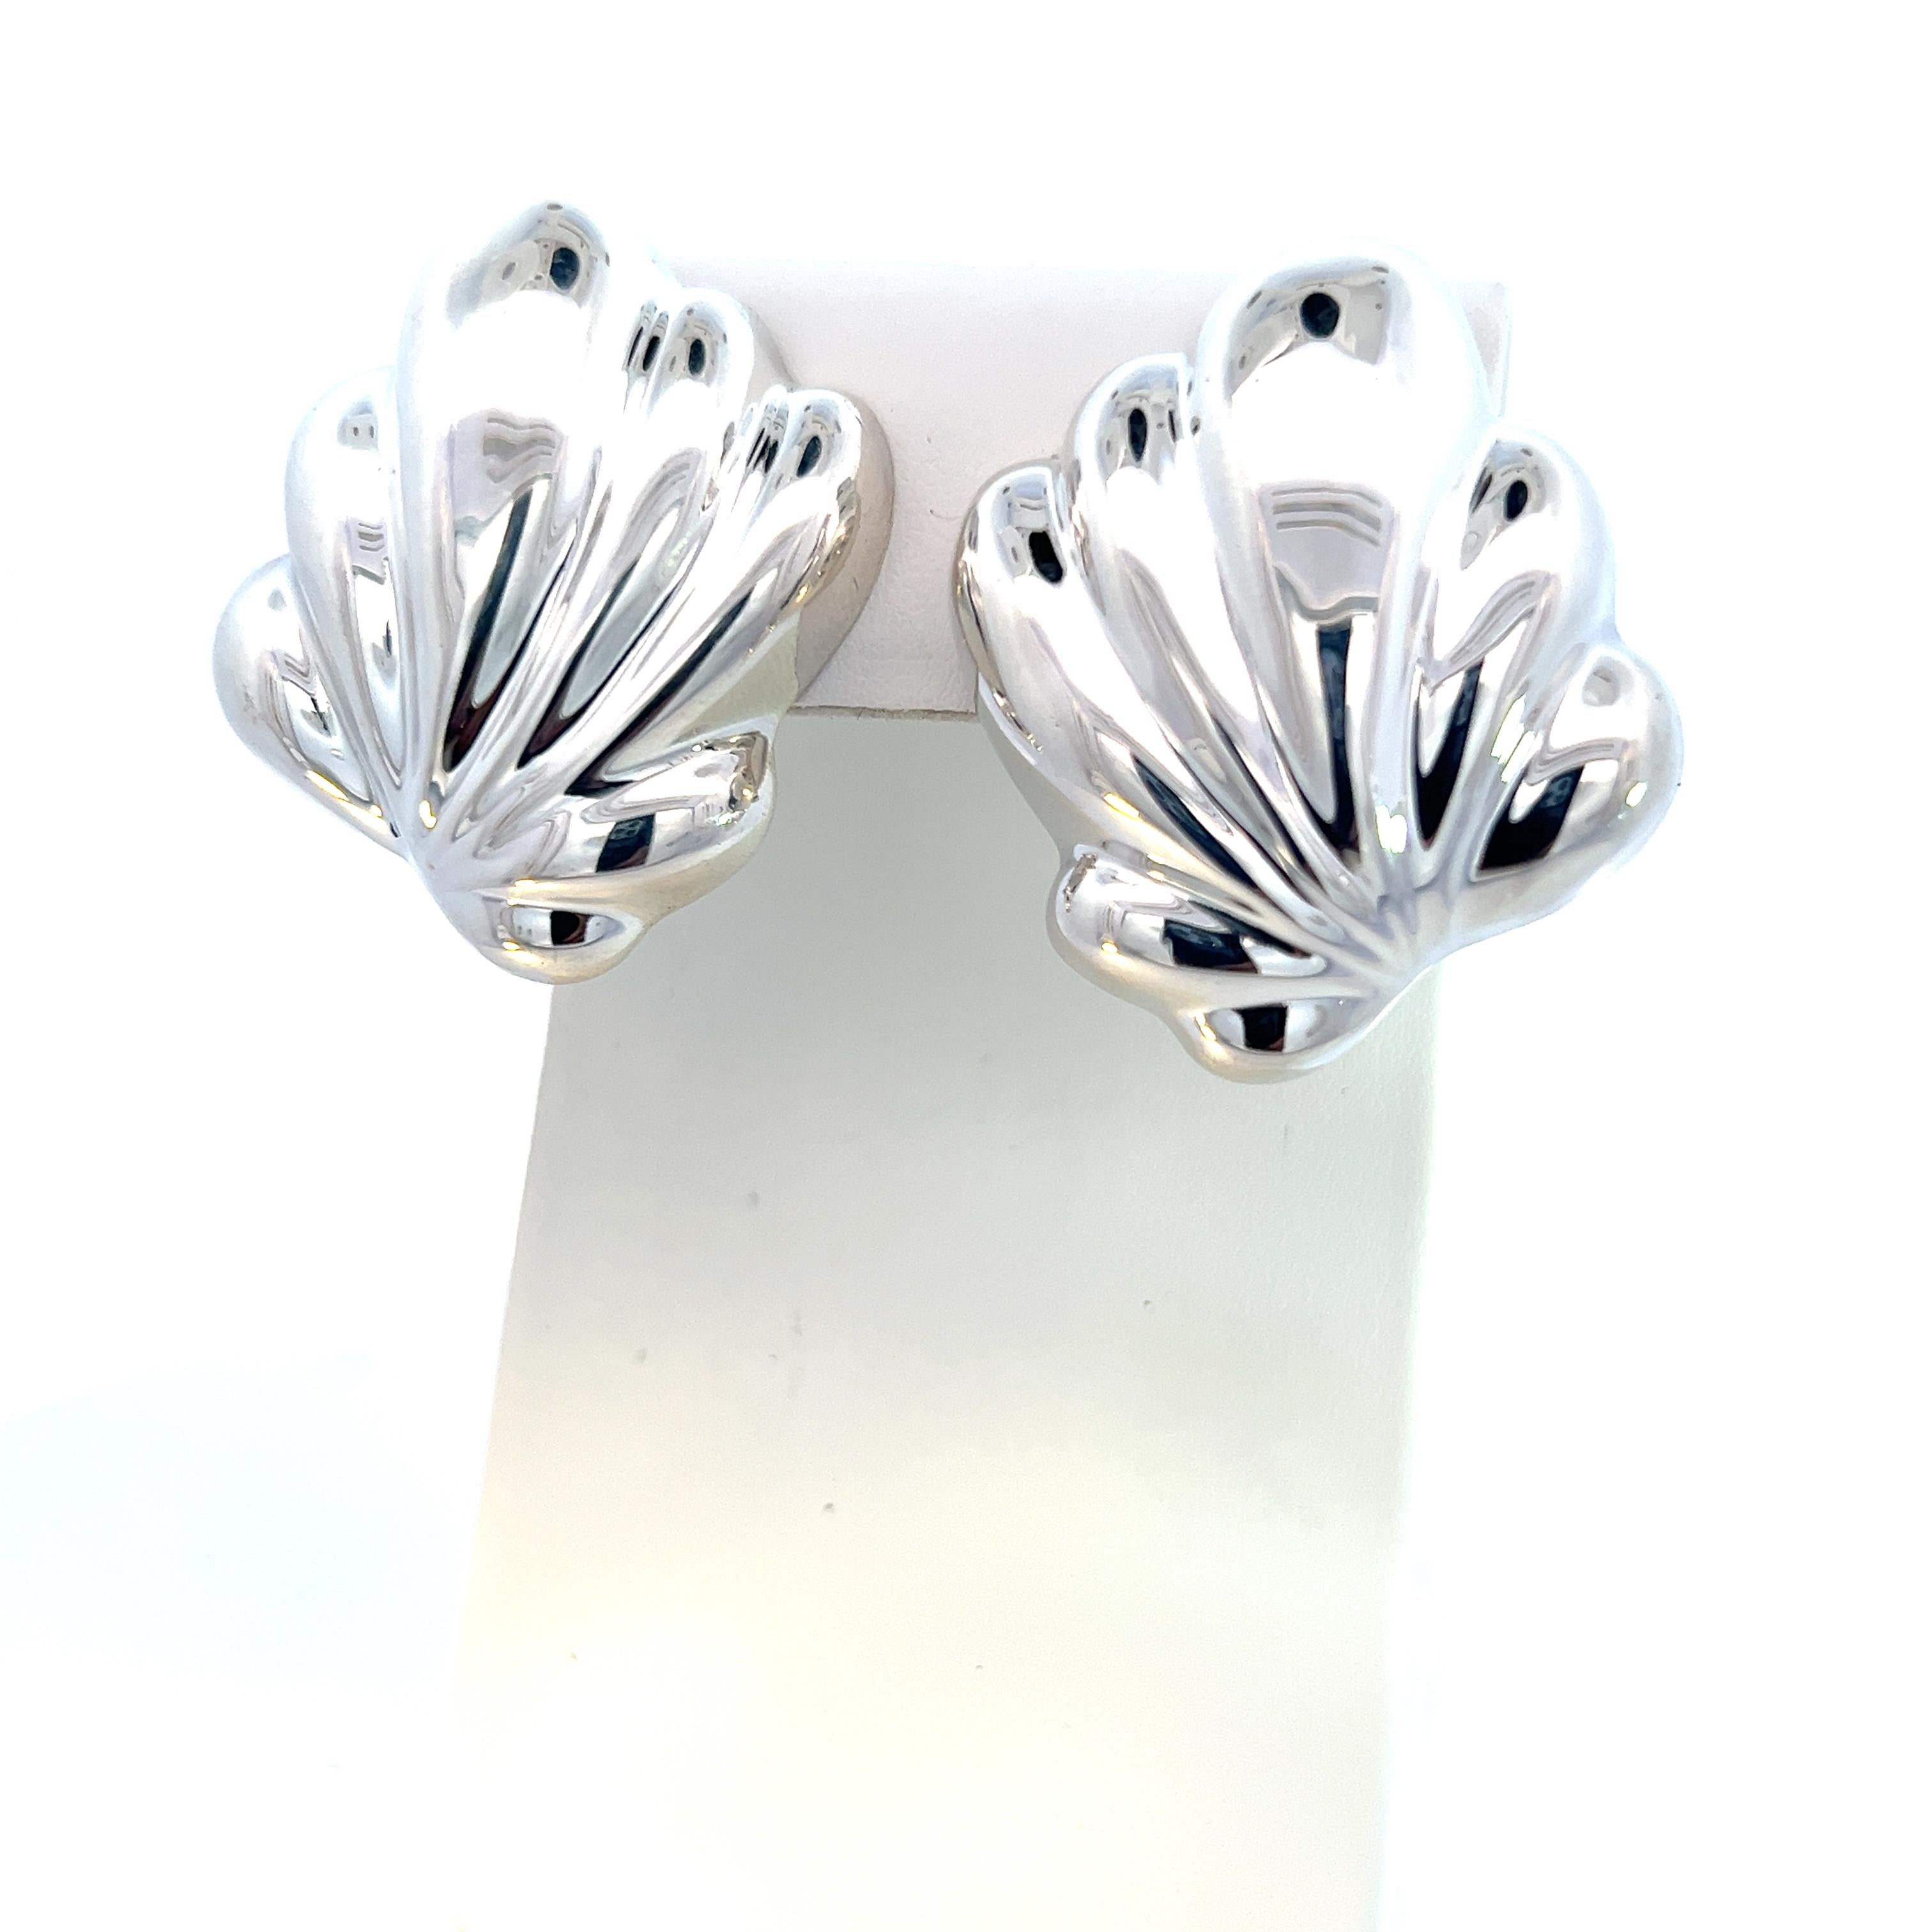 Tiffany & Co Estate Puffed Shell Omega Back Earrings Silver 21.30 Grams TIF636

These elegant Authentic Tiffany & Co. earrings are made of sterling silver.

TRUSTED SELLER SINCE 2002

PLEASE SEE OUR HUNDREDS OF POSITIVE FEEDBACKS FROM OUR